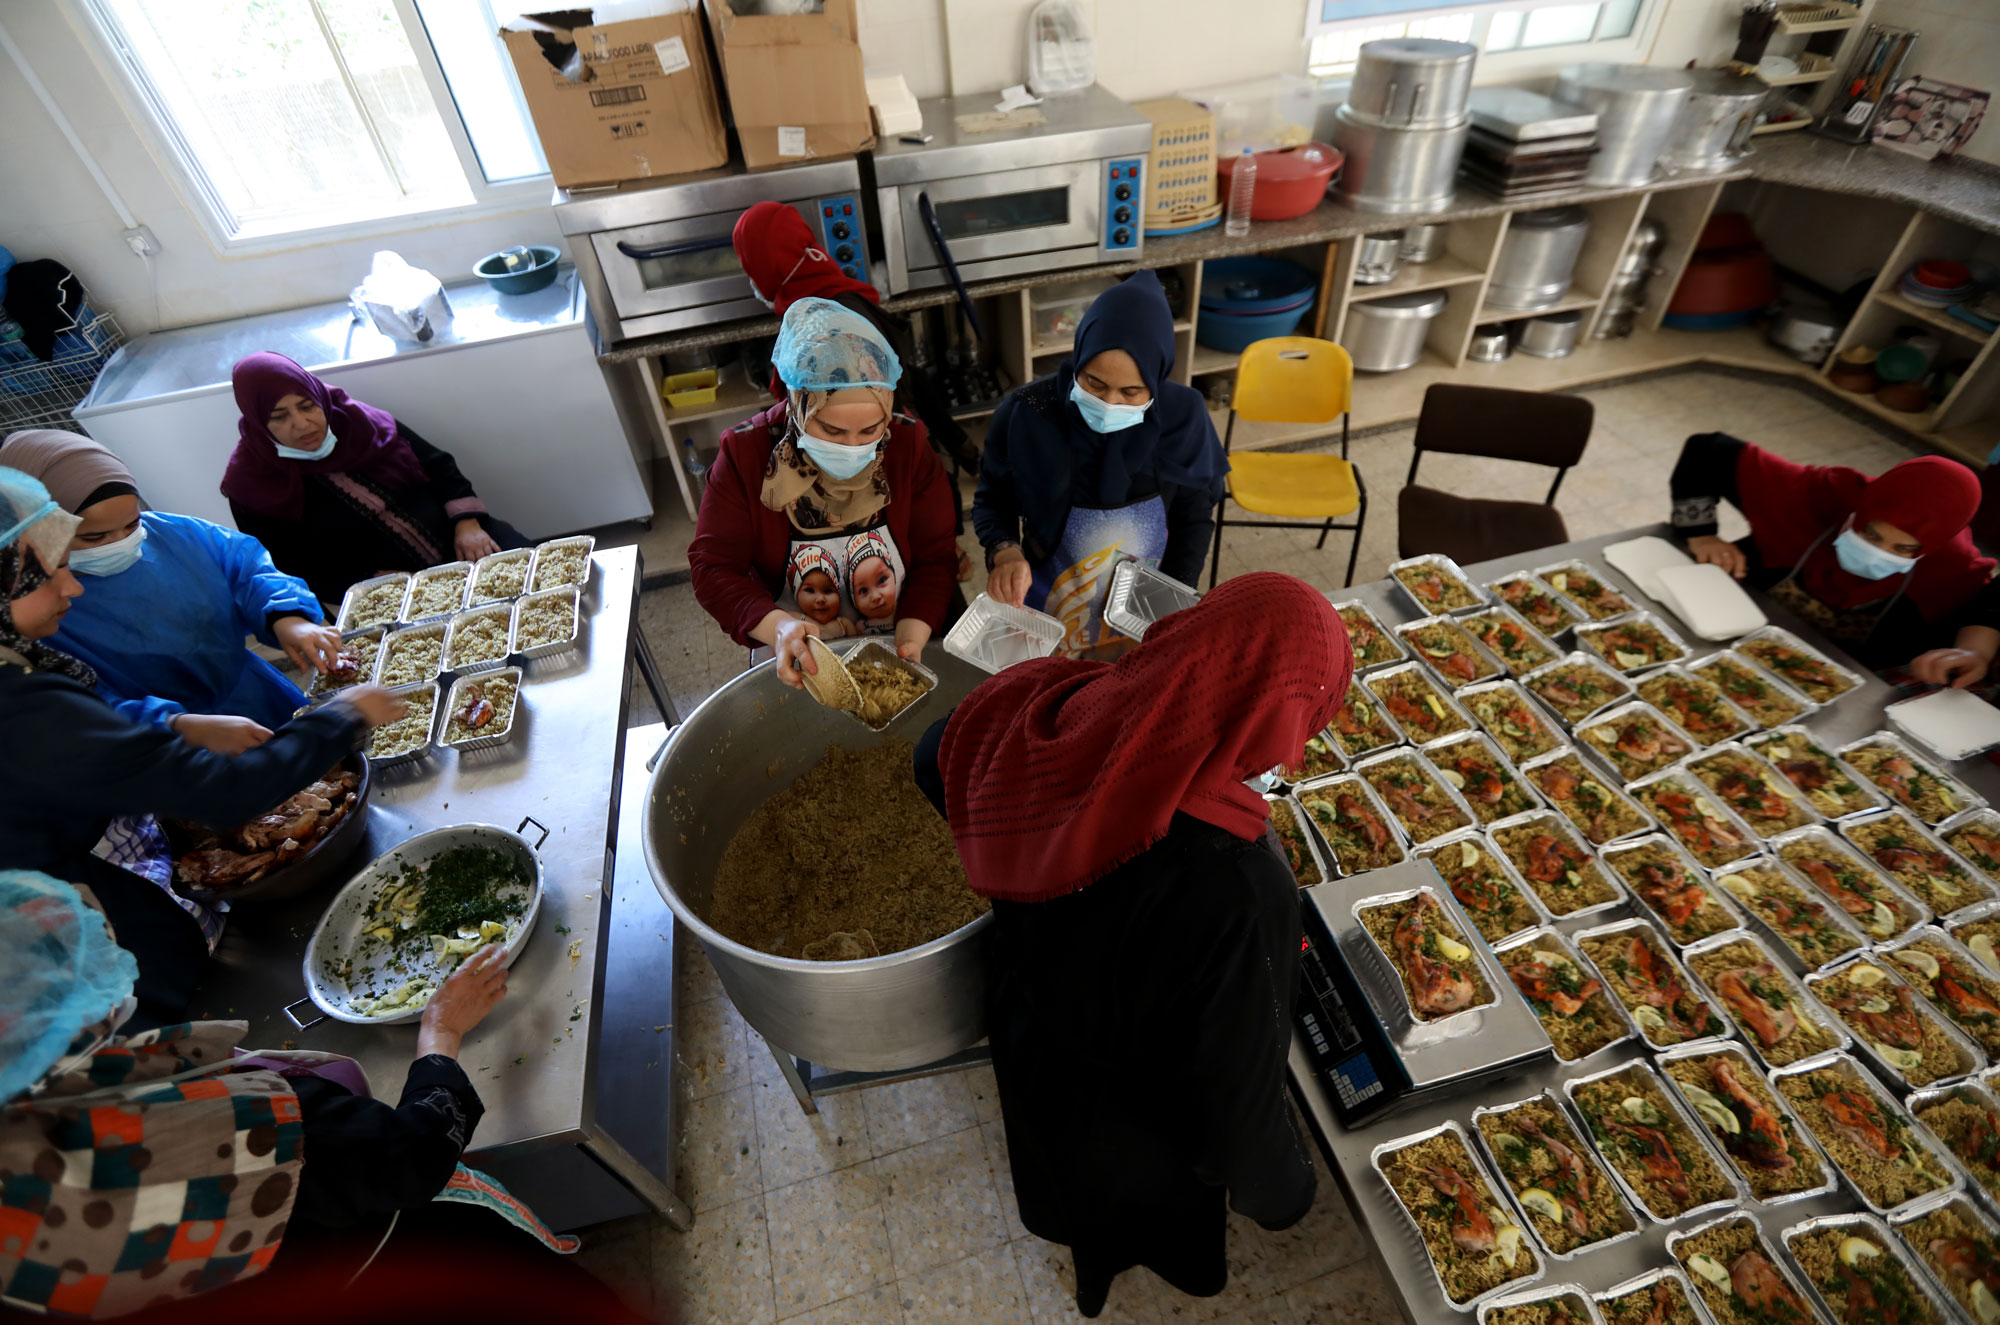 An overhead view of the meal preparation.